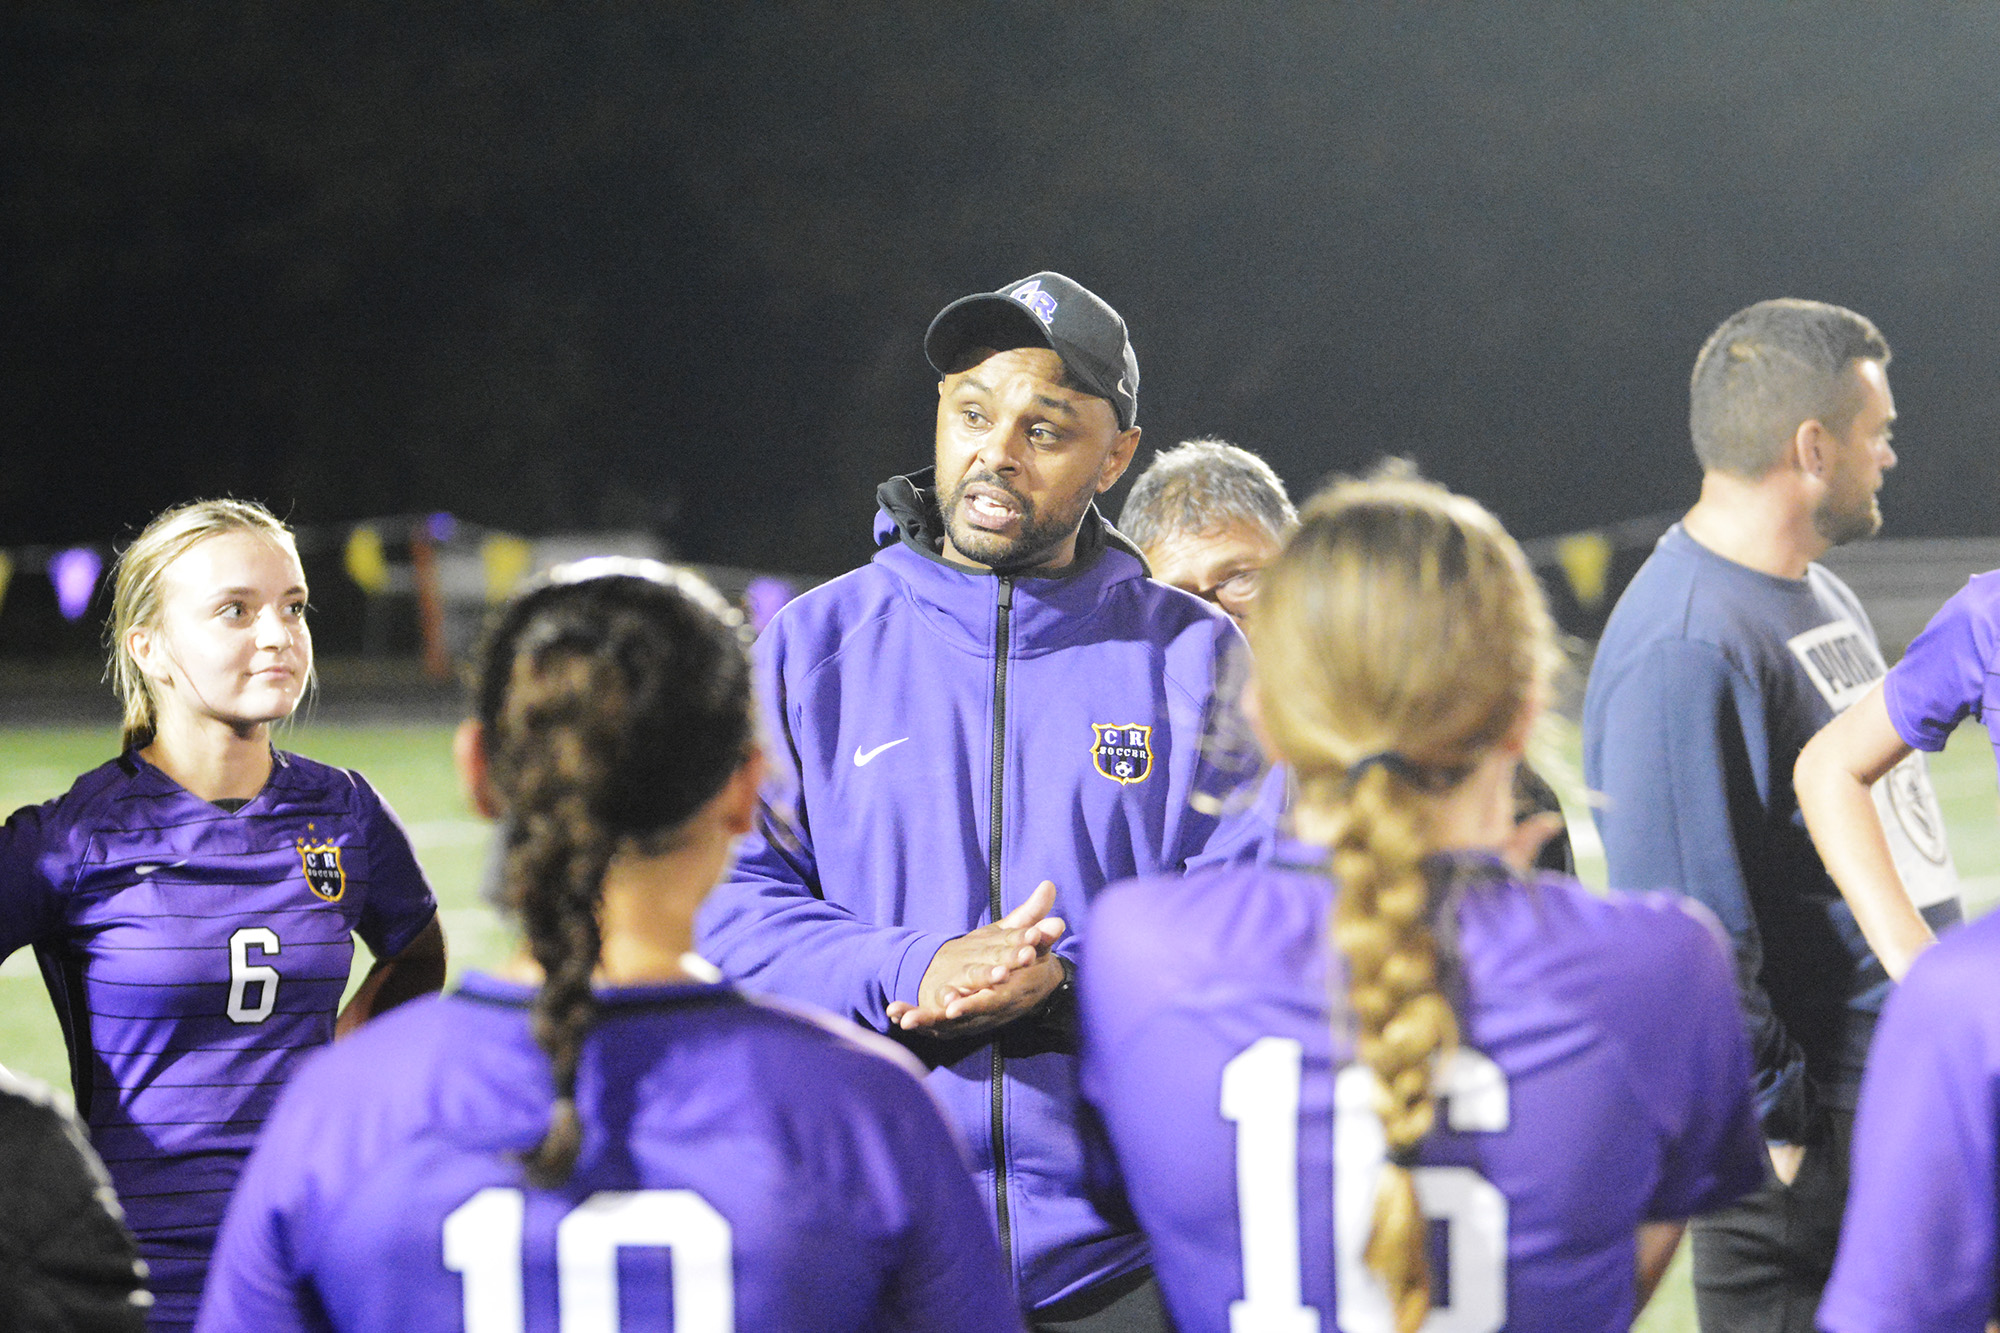 Columbia River coach Filly Afenegus addresses his team after the Rapids’ 2-1 win over Ridgefield on Tuesday, Oct. 4, 2022.